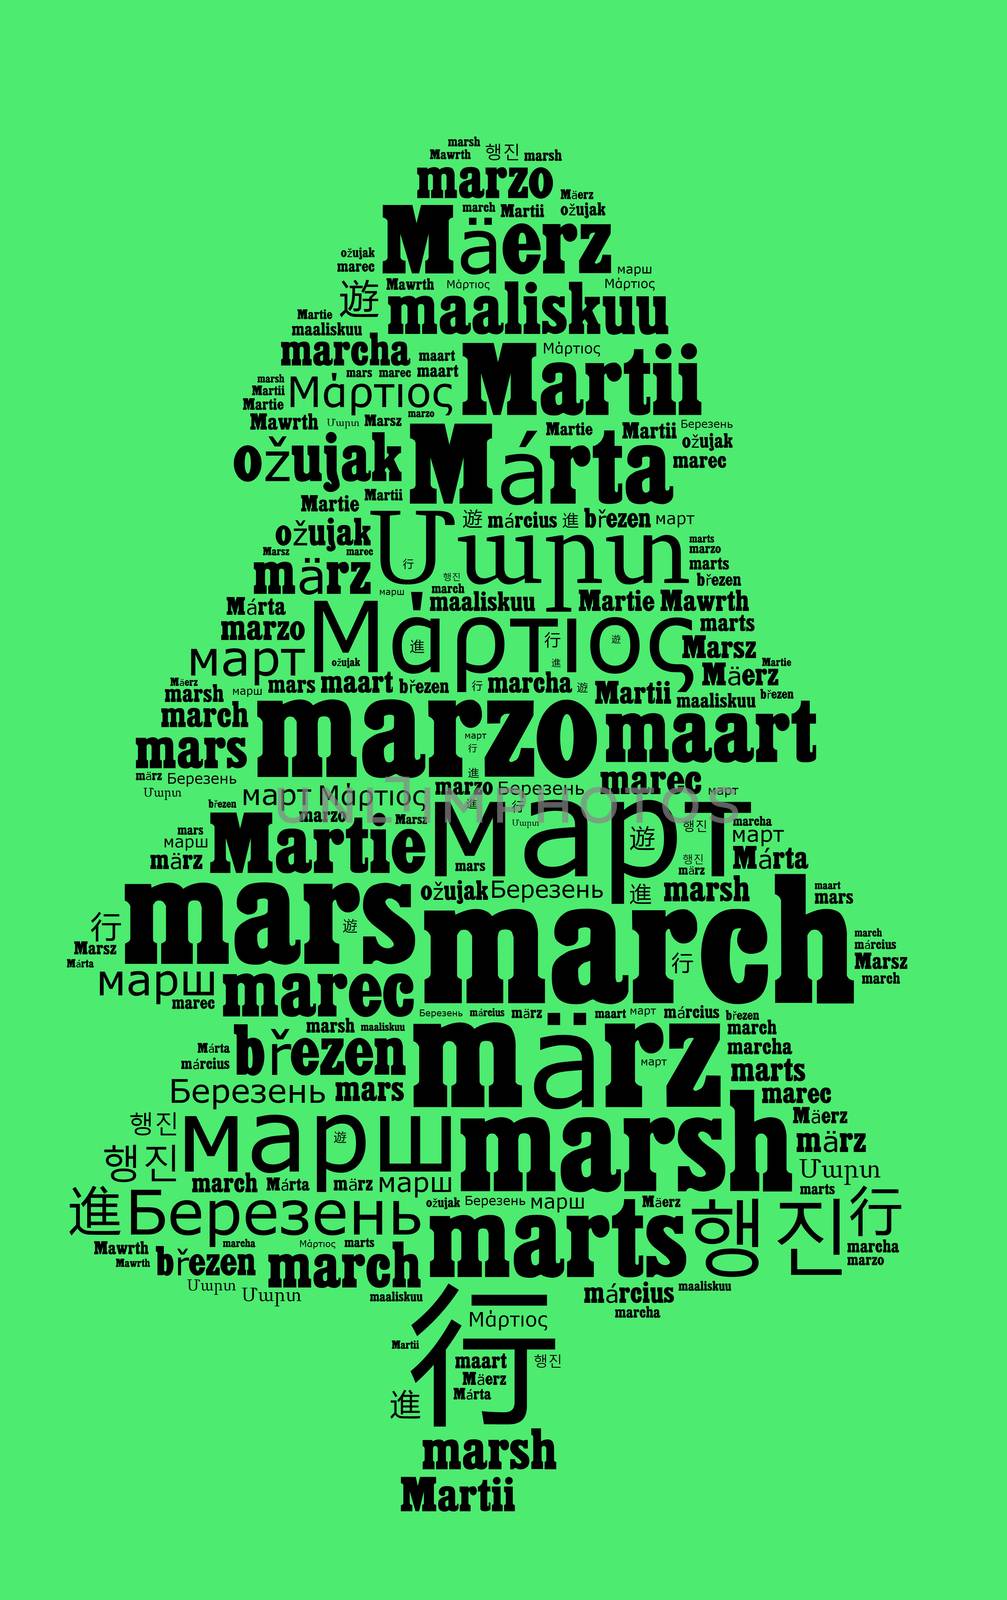 Word January in different languages word cloud concept